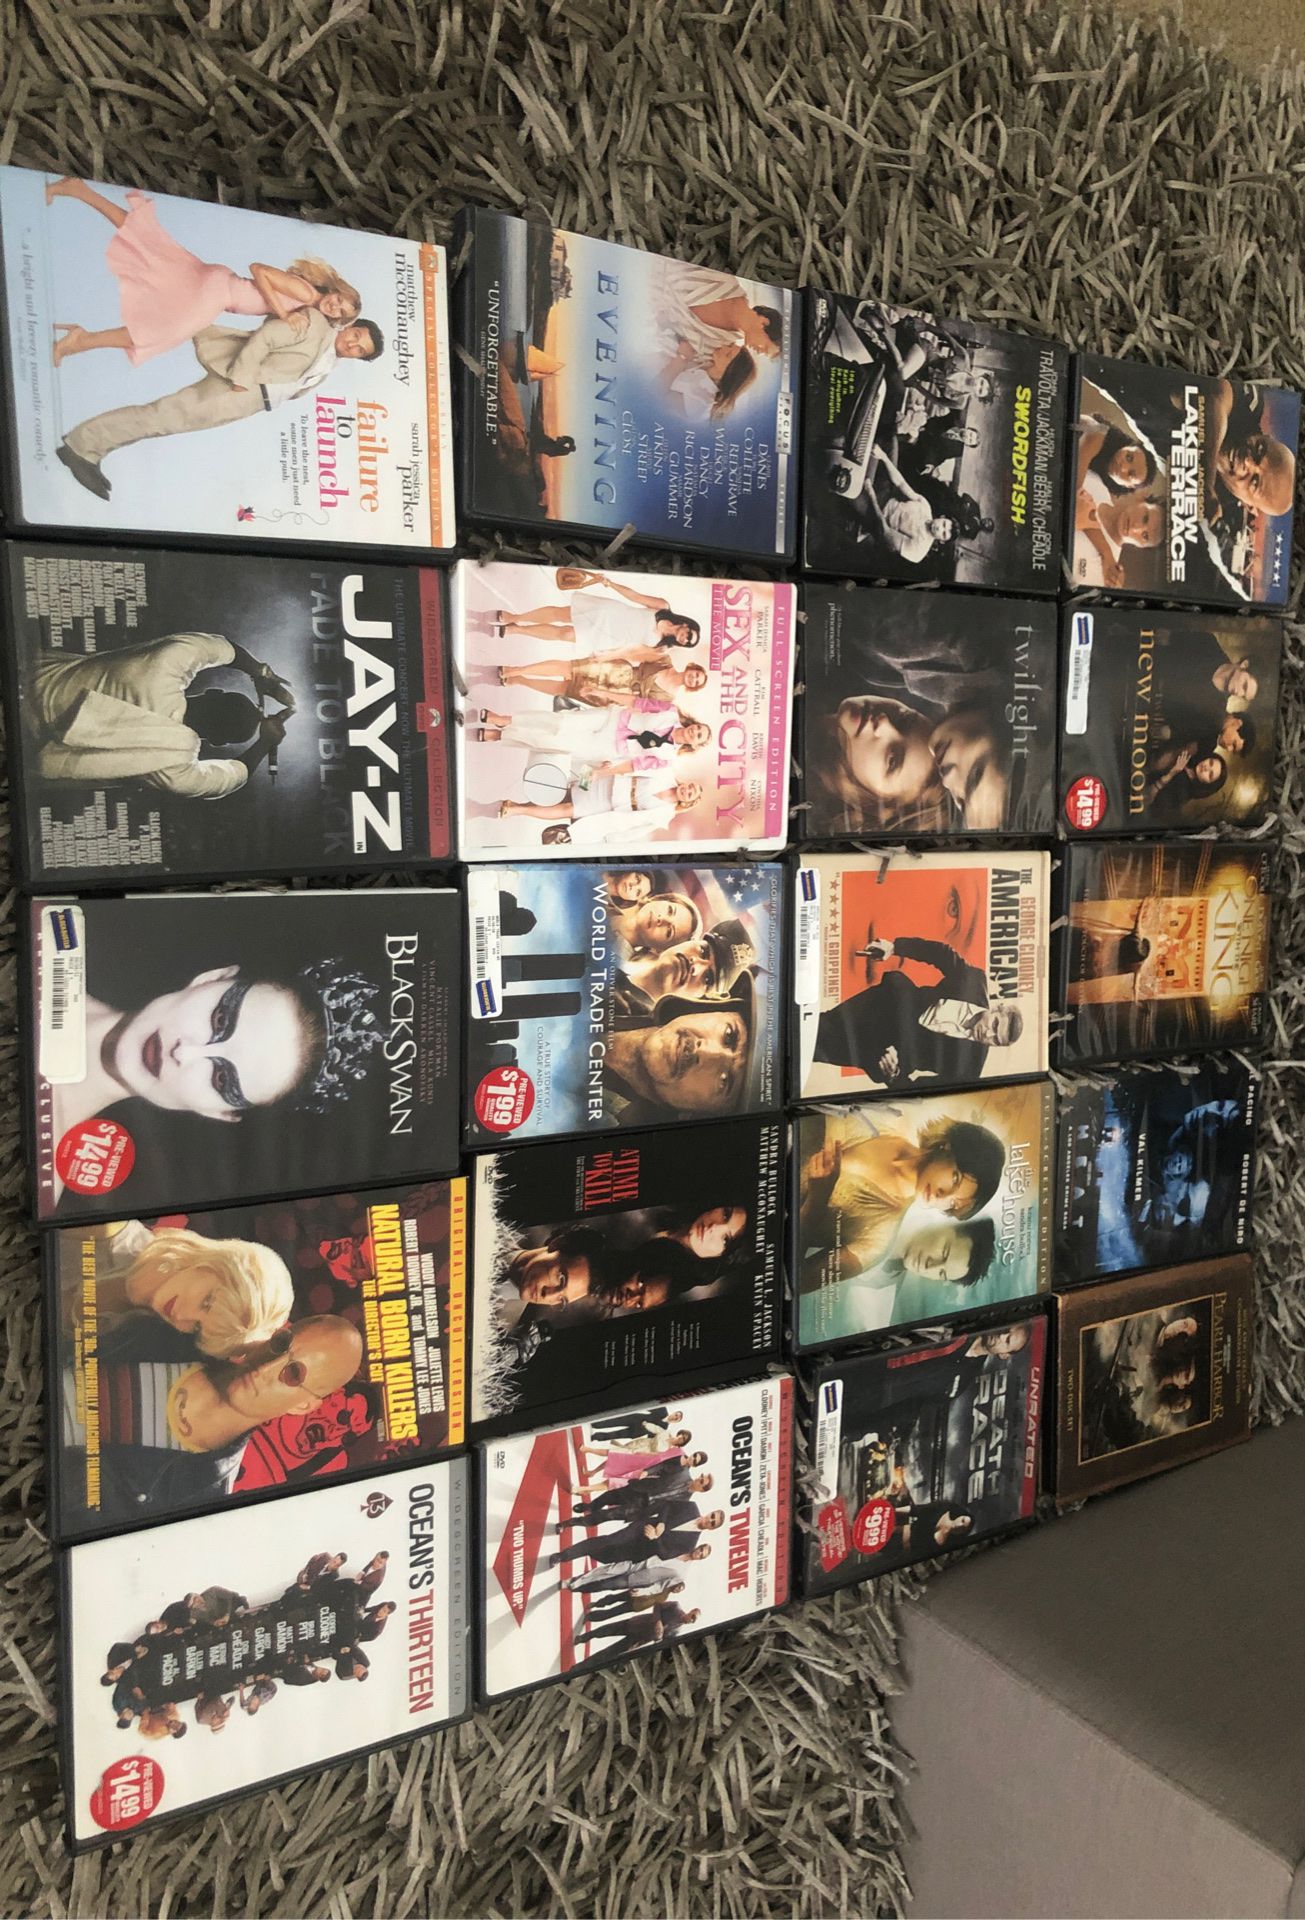 20 DVD MOVIES SEEN ONLY ONCE